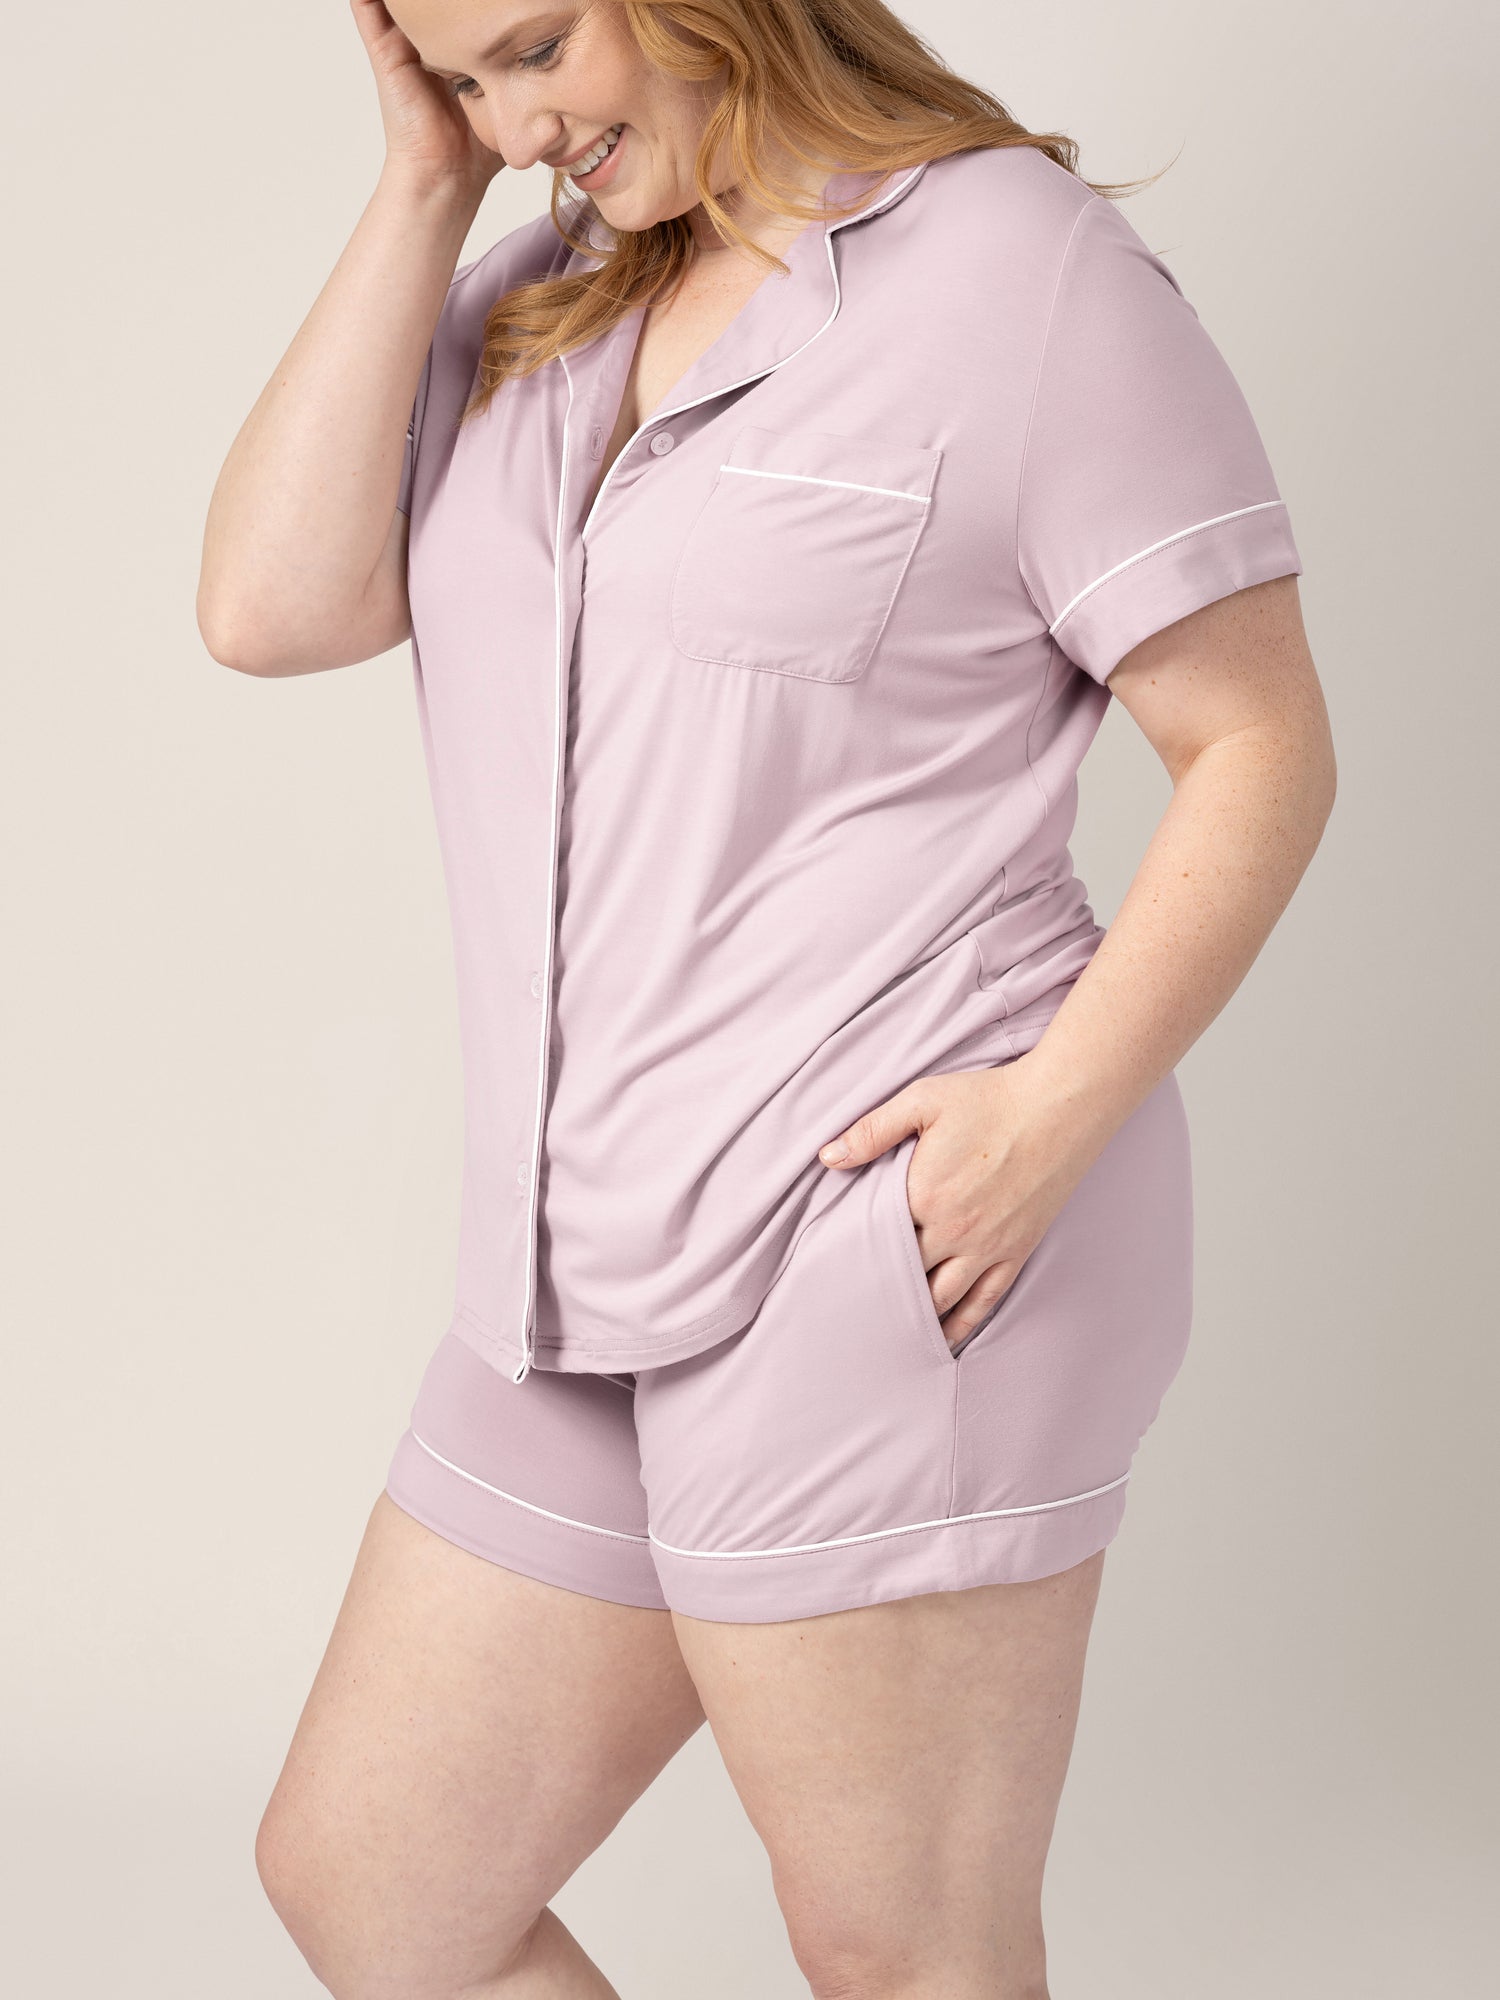 Side view of model wearing the Clea Bamboo Classic Short Sleeve Pajama Set in Lilac, with hand in pocket